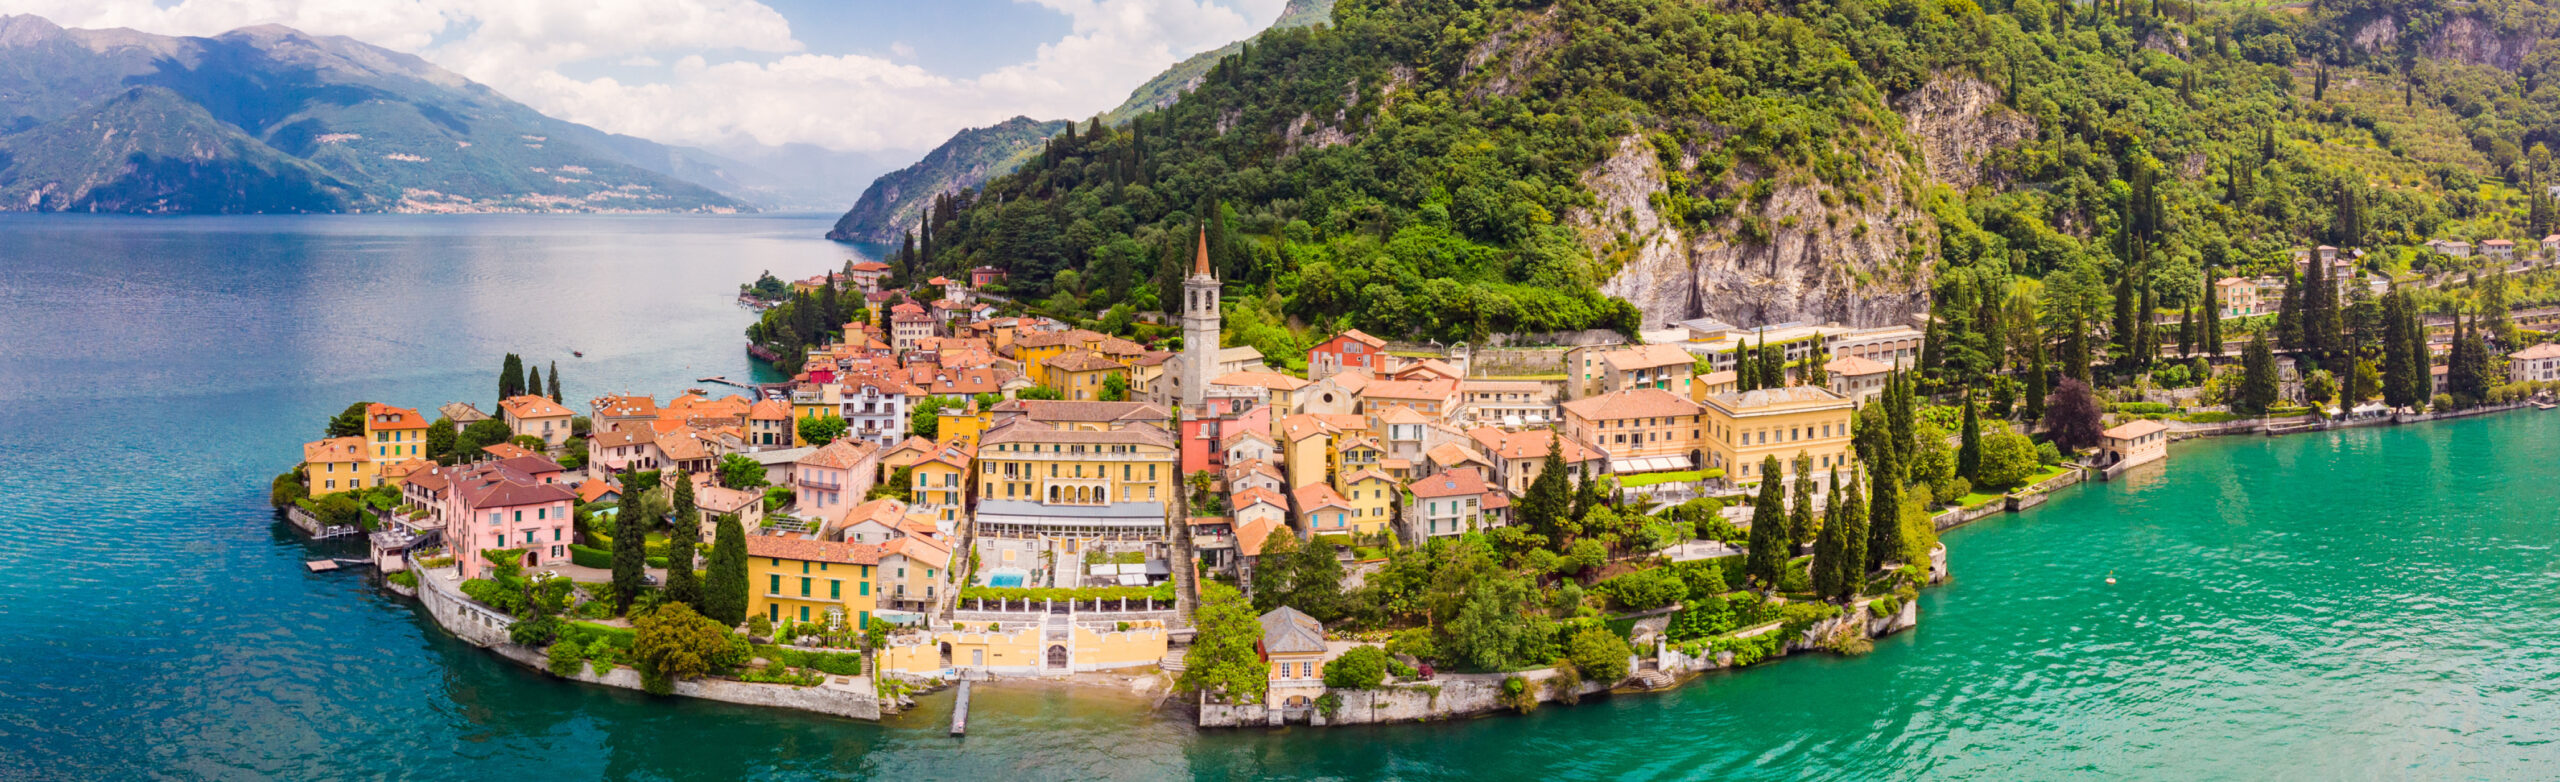 Best Things To Do In Lake Como Italy - Lake Como town on edge of land mass